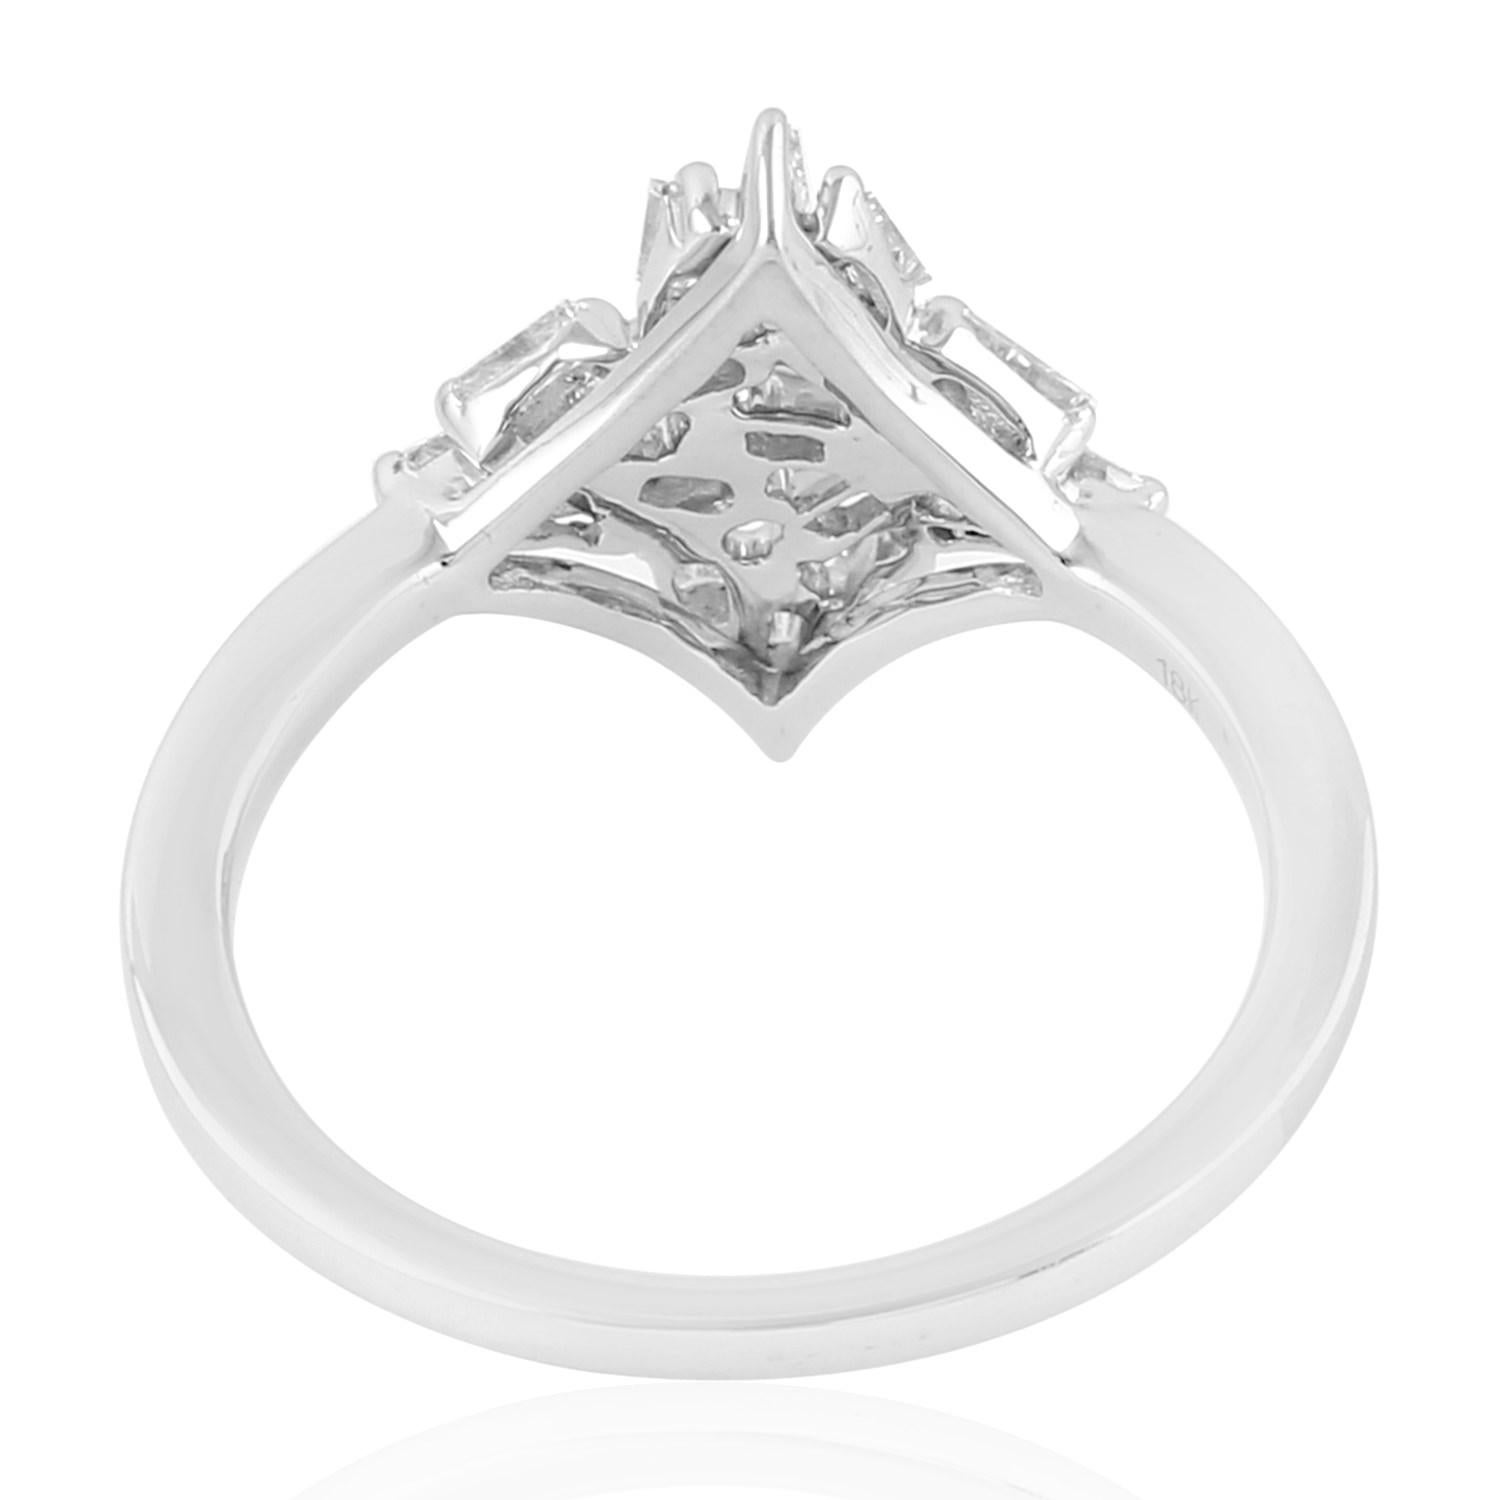 Contemporary Star Shaped Baguette Diamond Ring Made In 18k White Gold For Sale